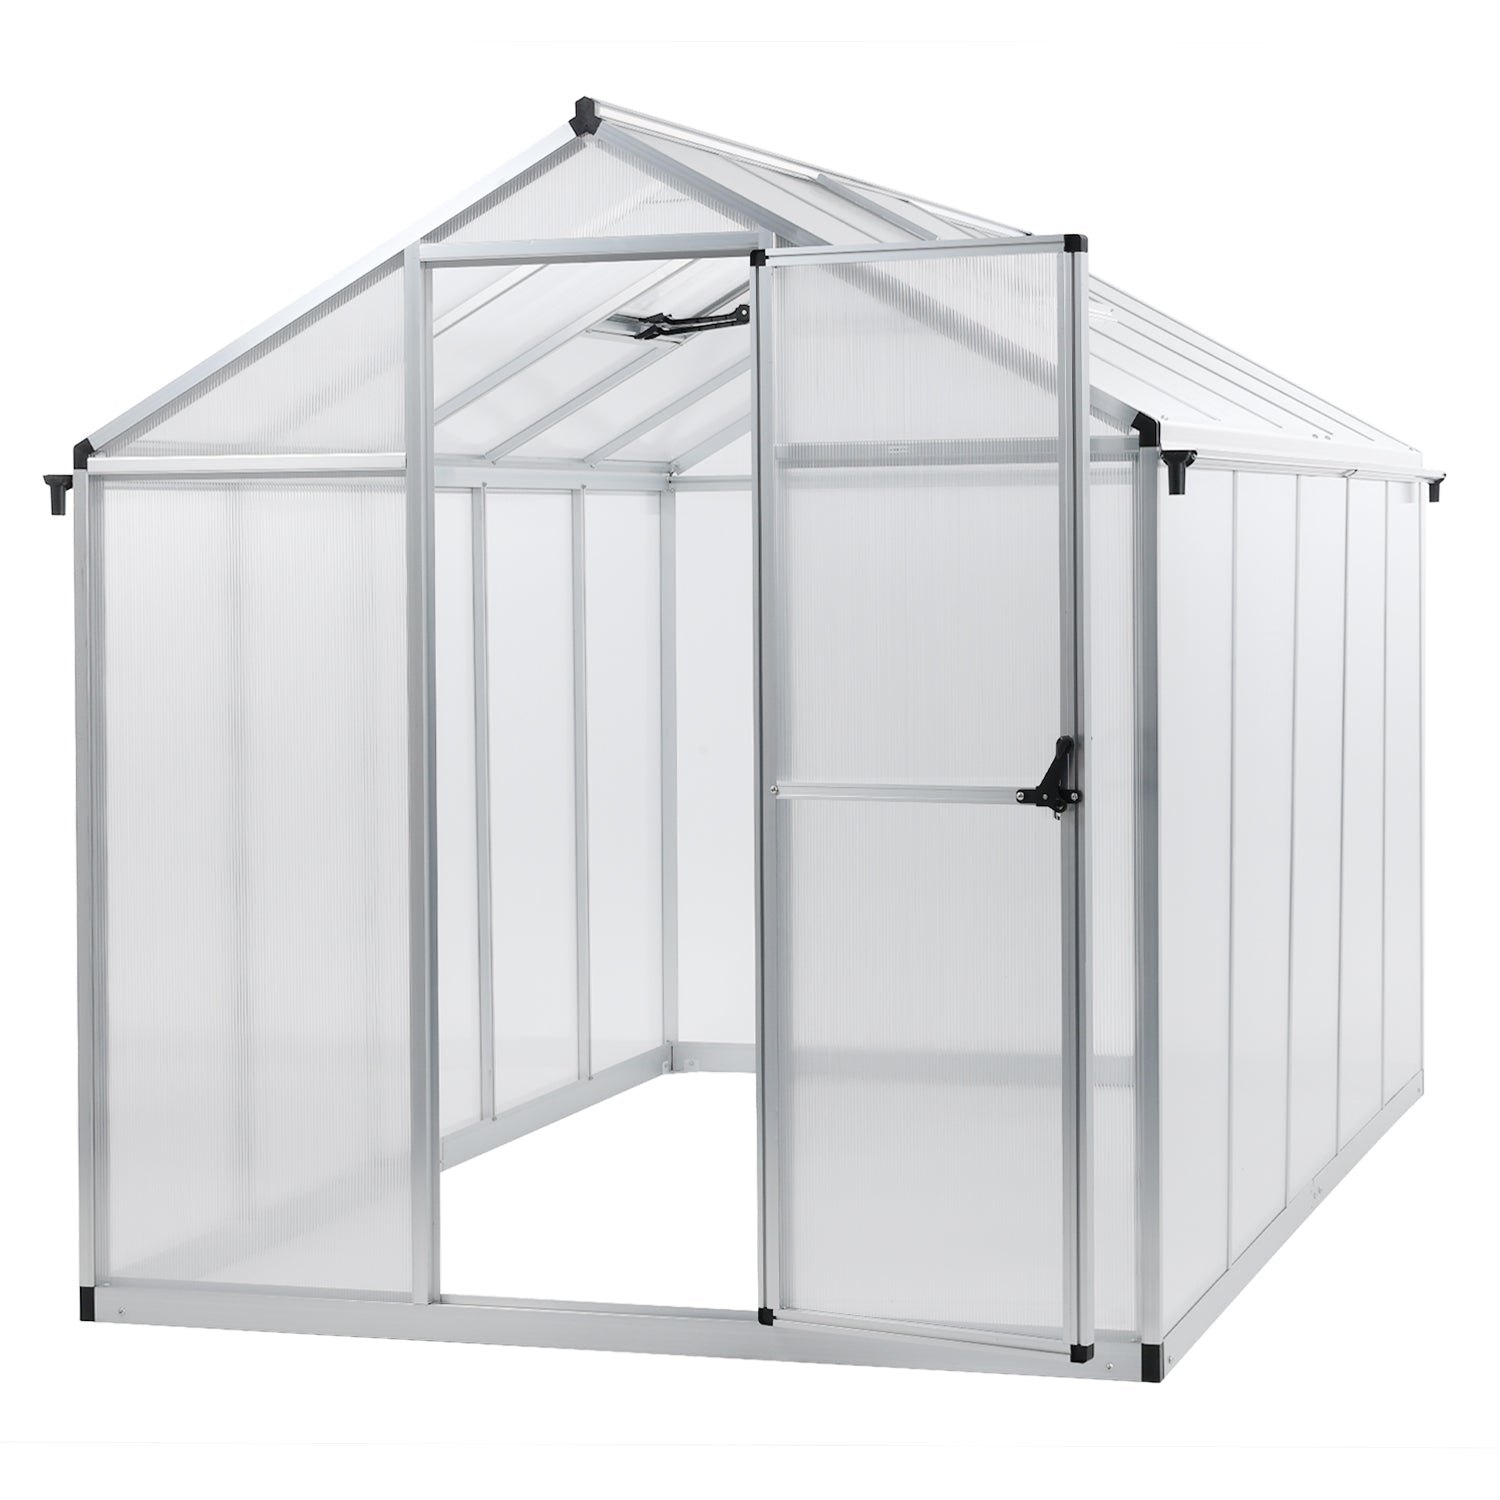 6' x 8' /6' x 10' Walk-in Polycarbonate Greenhouse with Roof Vent and Door lock,  Aluminum Frame and Polycarbonate Panels- White/Black  Aoodor LLC 6' x 10' Silver 